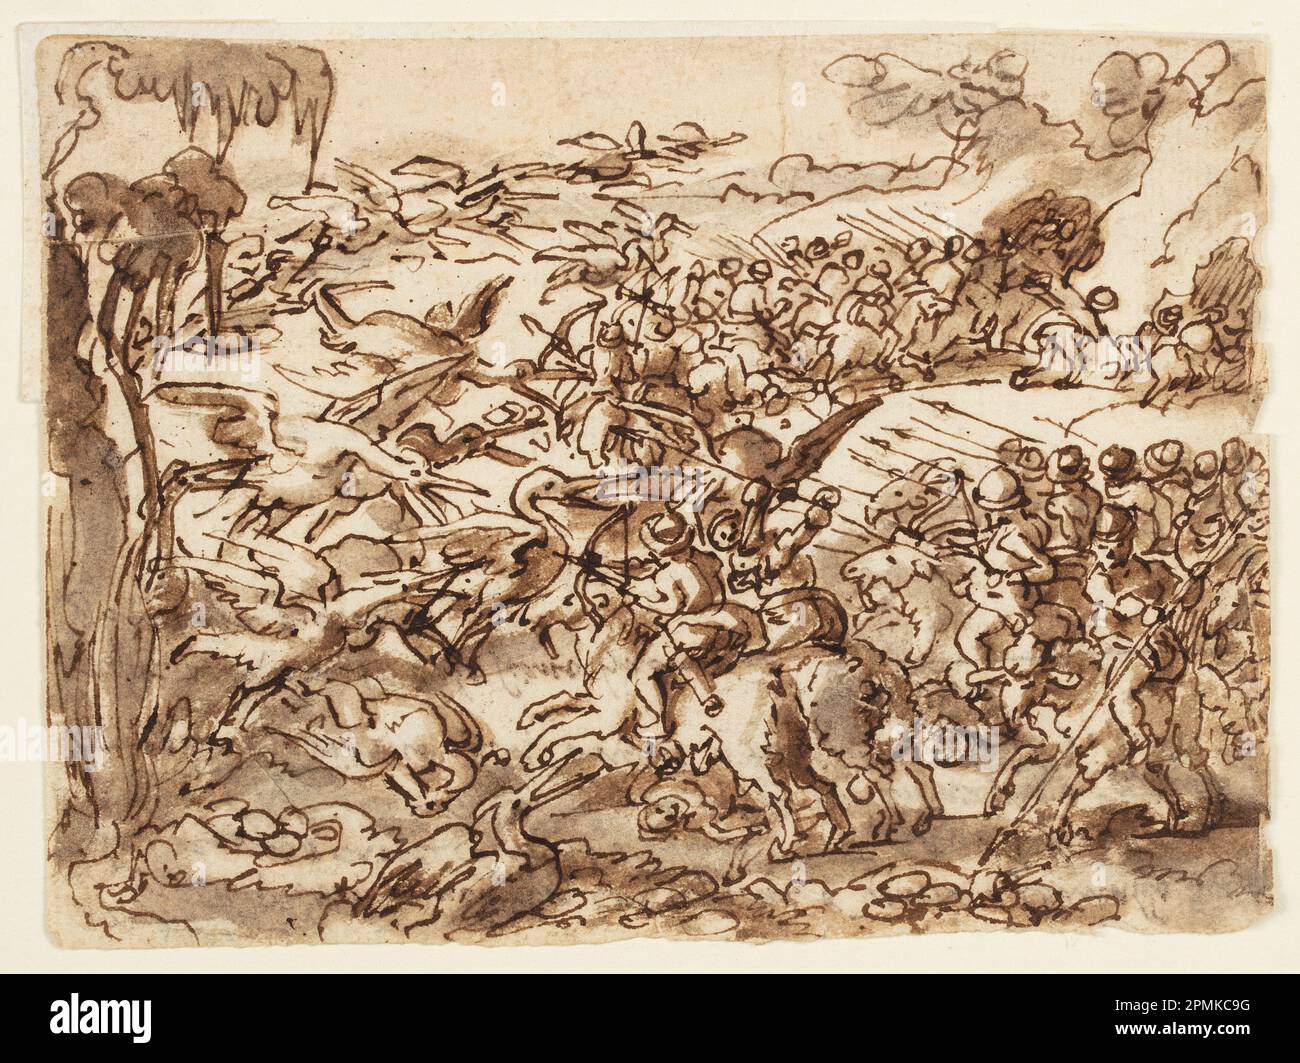 Drawing, Fight between Pygmies and Cranes; Jan van der Straet, called Stradanus (Flemish, 1523–1605); Engraved by Adriaen Collaert (Flemish, ca. 1560 – 1618); Published by Philips Galle (Flemish, 1537 - 1612); Subject: Homer (Greek (active 8th or 9th century BCE)), Pliny the Elder (Roman, 23 - 79 CE); Netherlands; pen and brown ink, brush and brown wash on paper Stock Photo